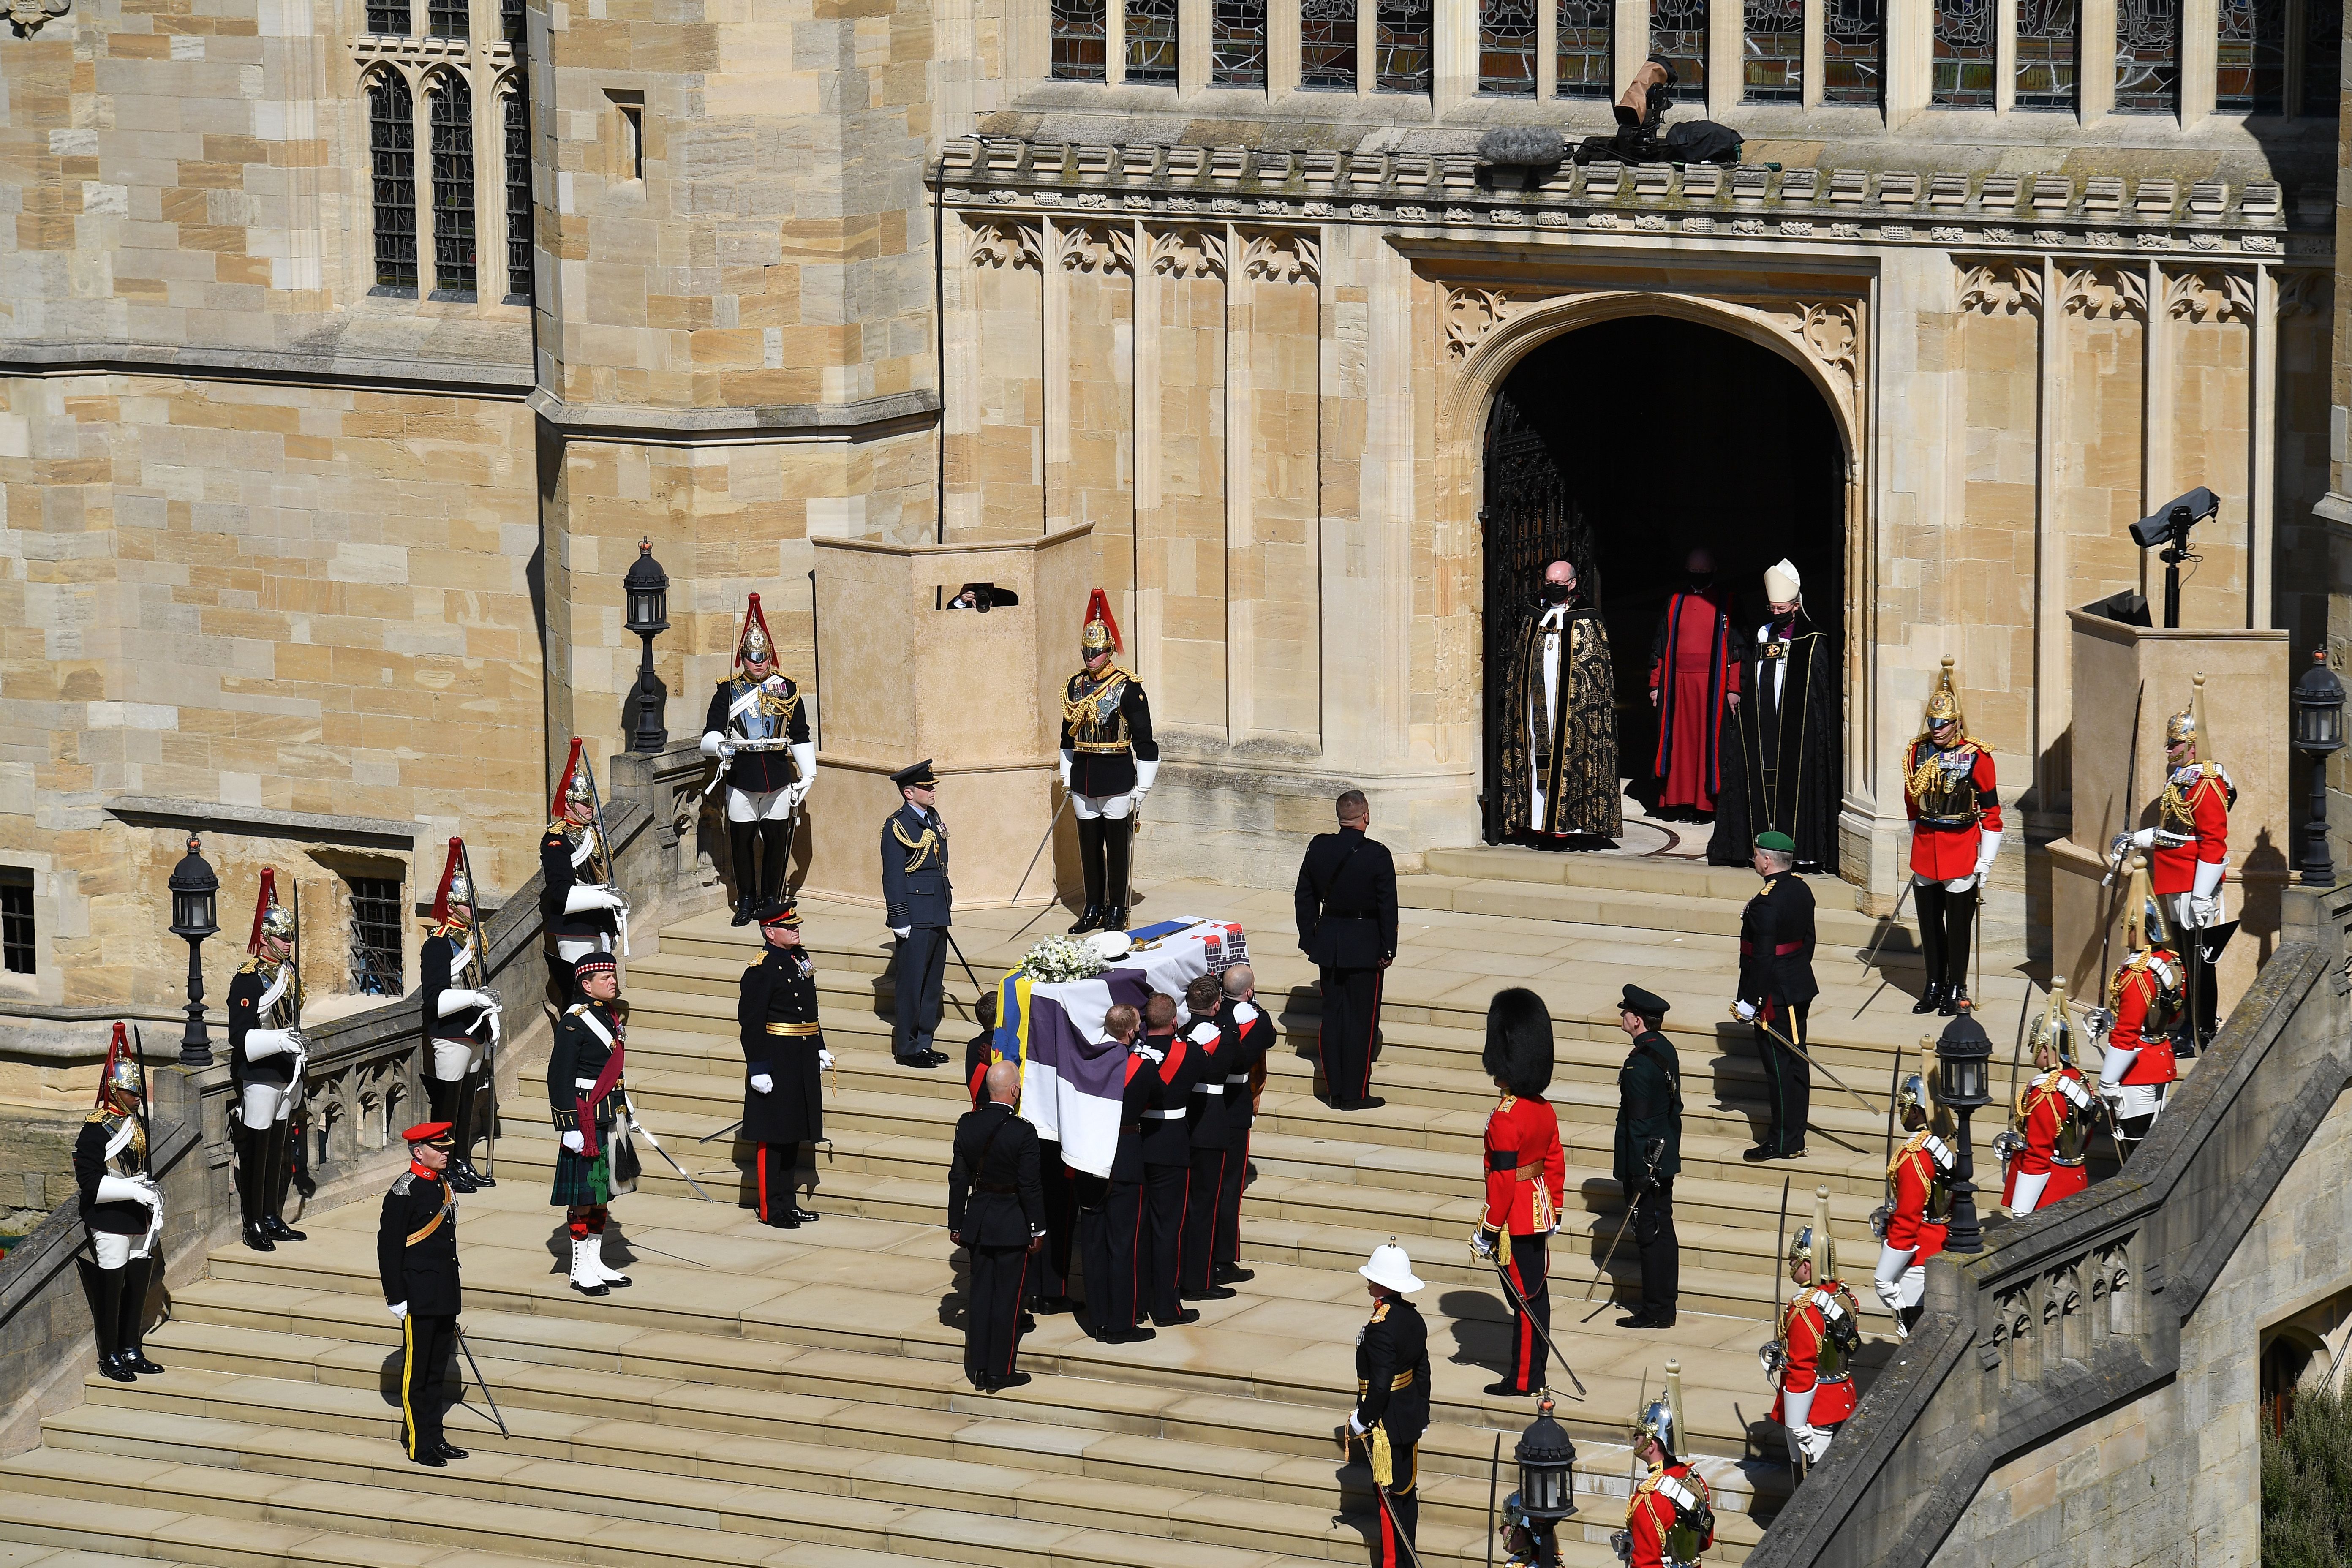 Photo of Prince Philip's coffin being carried up the stairs in St. George's chapel